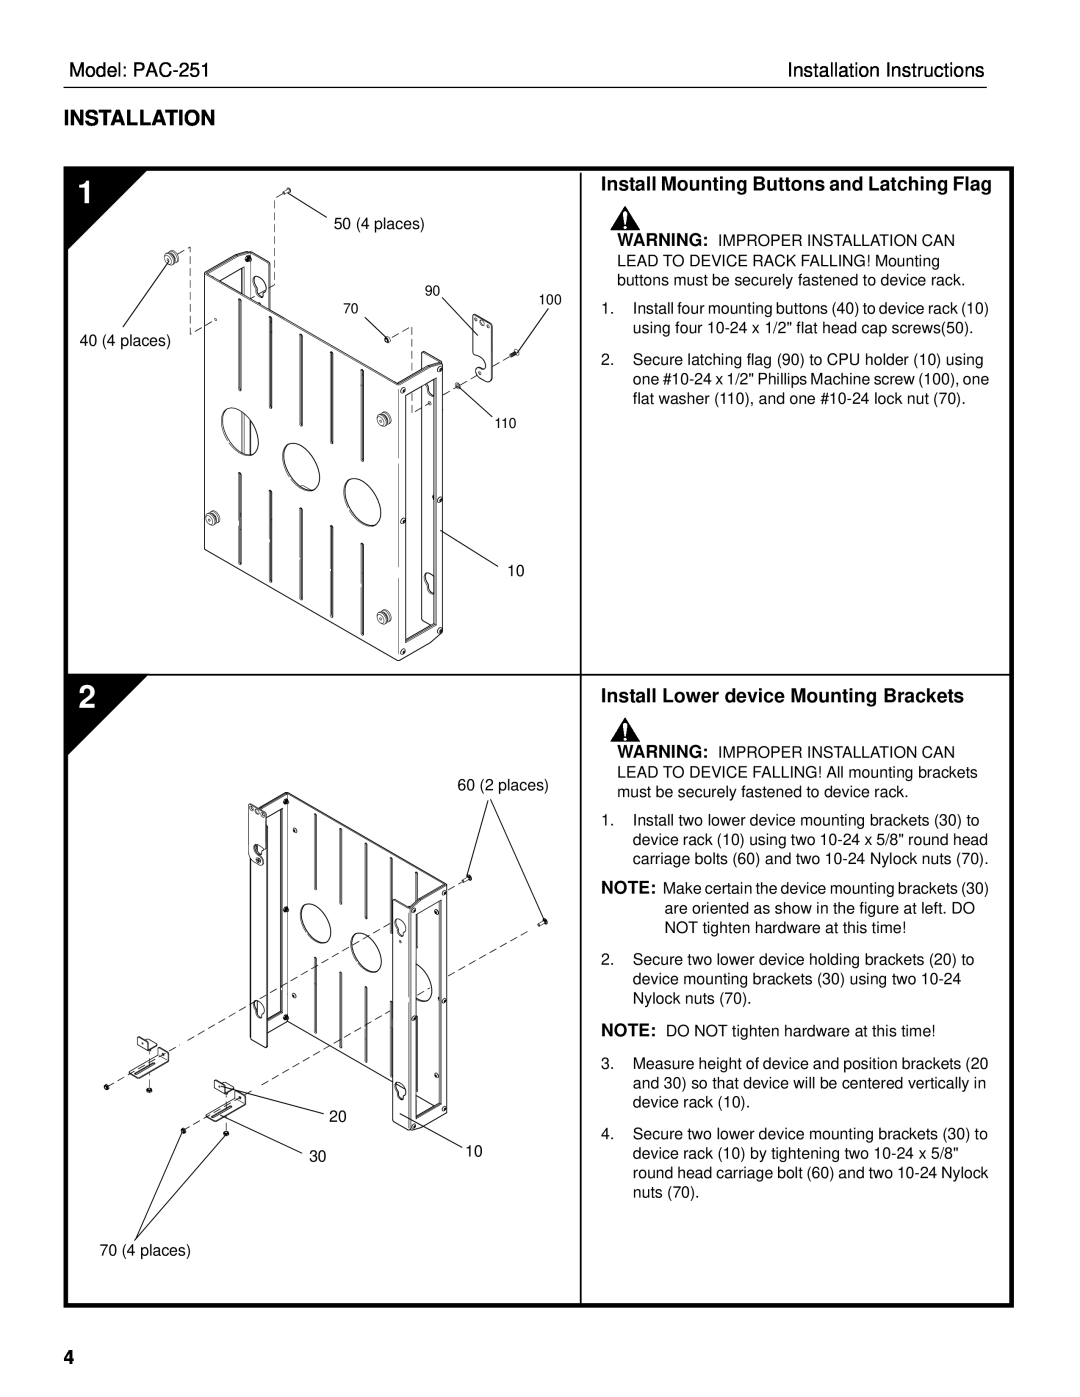 Chief Manufacturing Install Lower device Mounting Brackets, Model PAC-251, Installation Instructions 